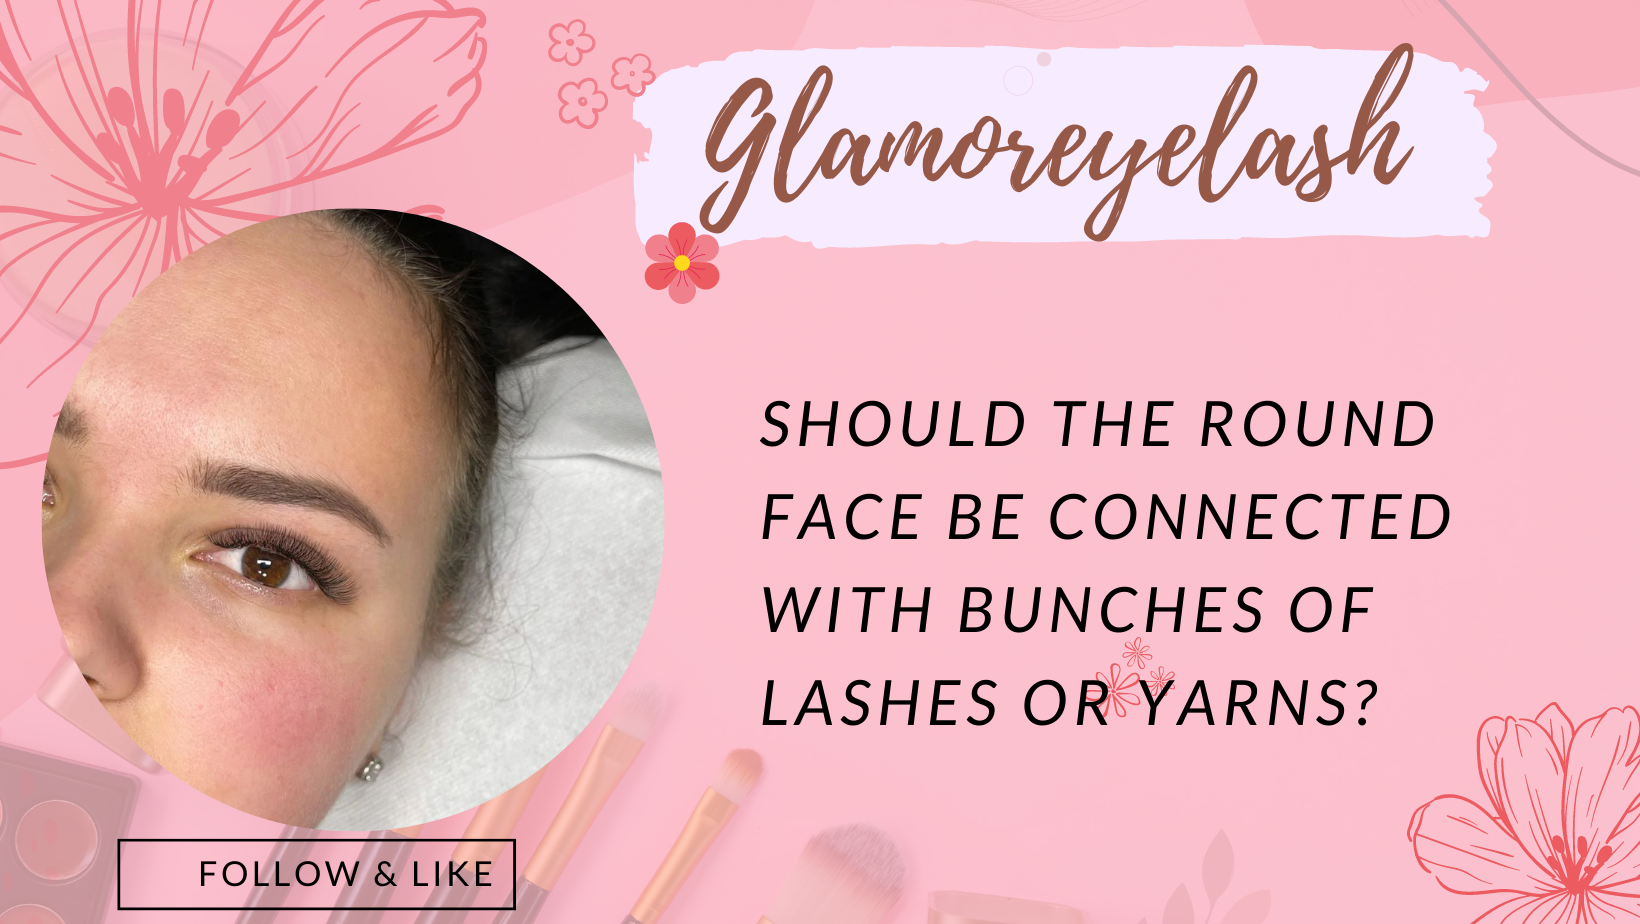 Should the round face be connected with bunches of lashes or yarns?